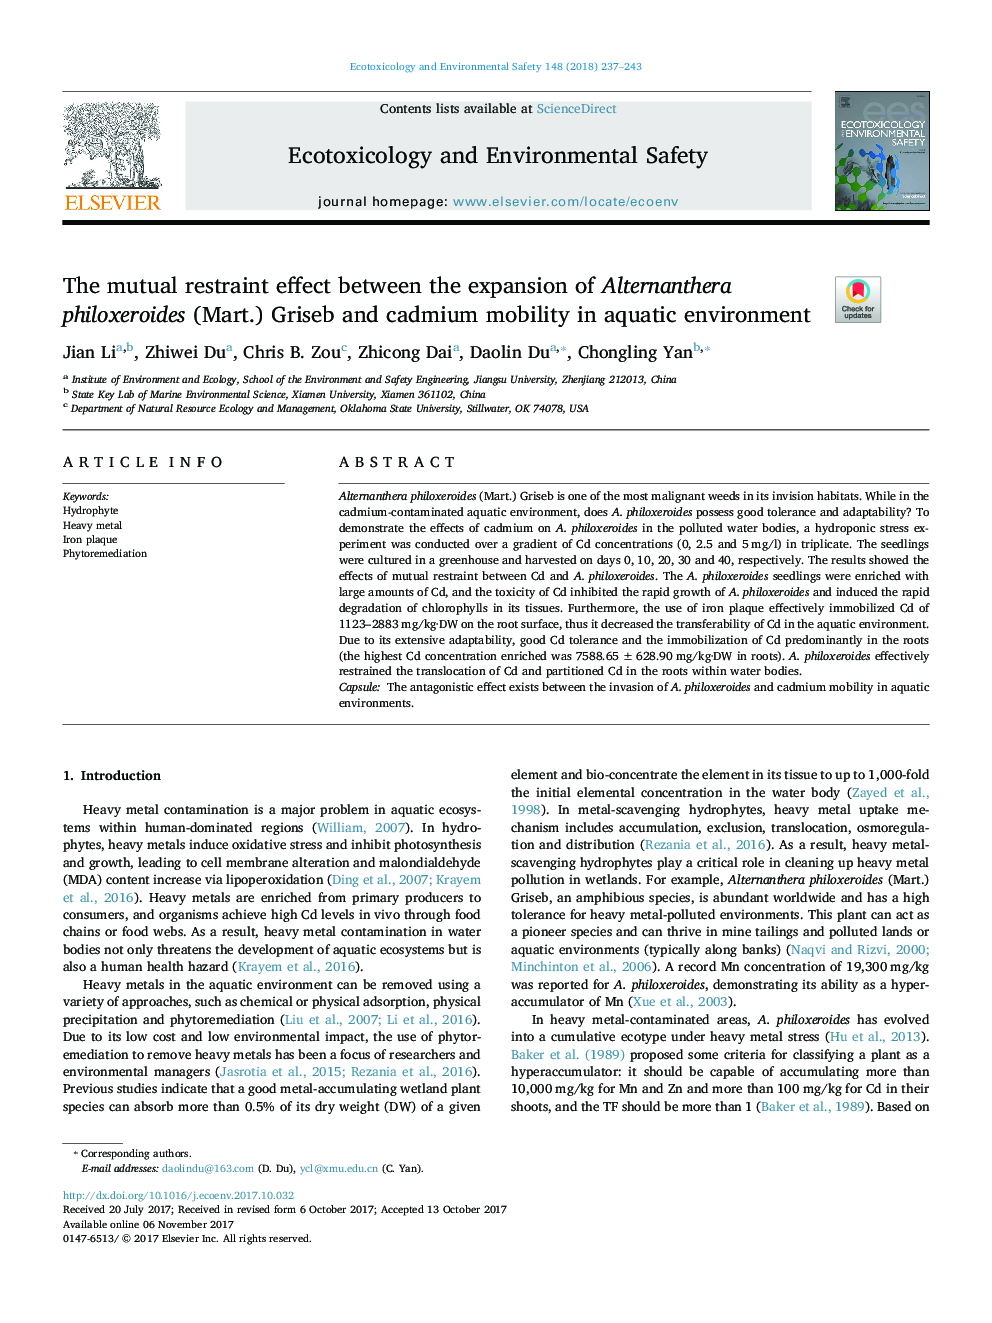 The mutual restraint effect between the expansion of Alternanthera philoxeroides (Mart.) Griseb and cadmium mobility in aquatic environment